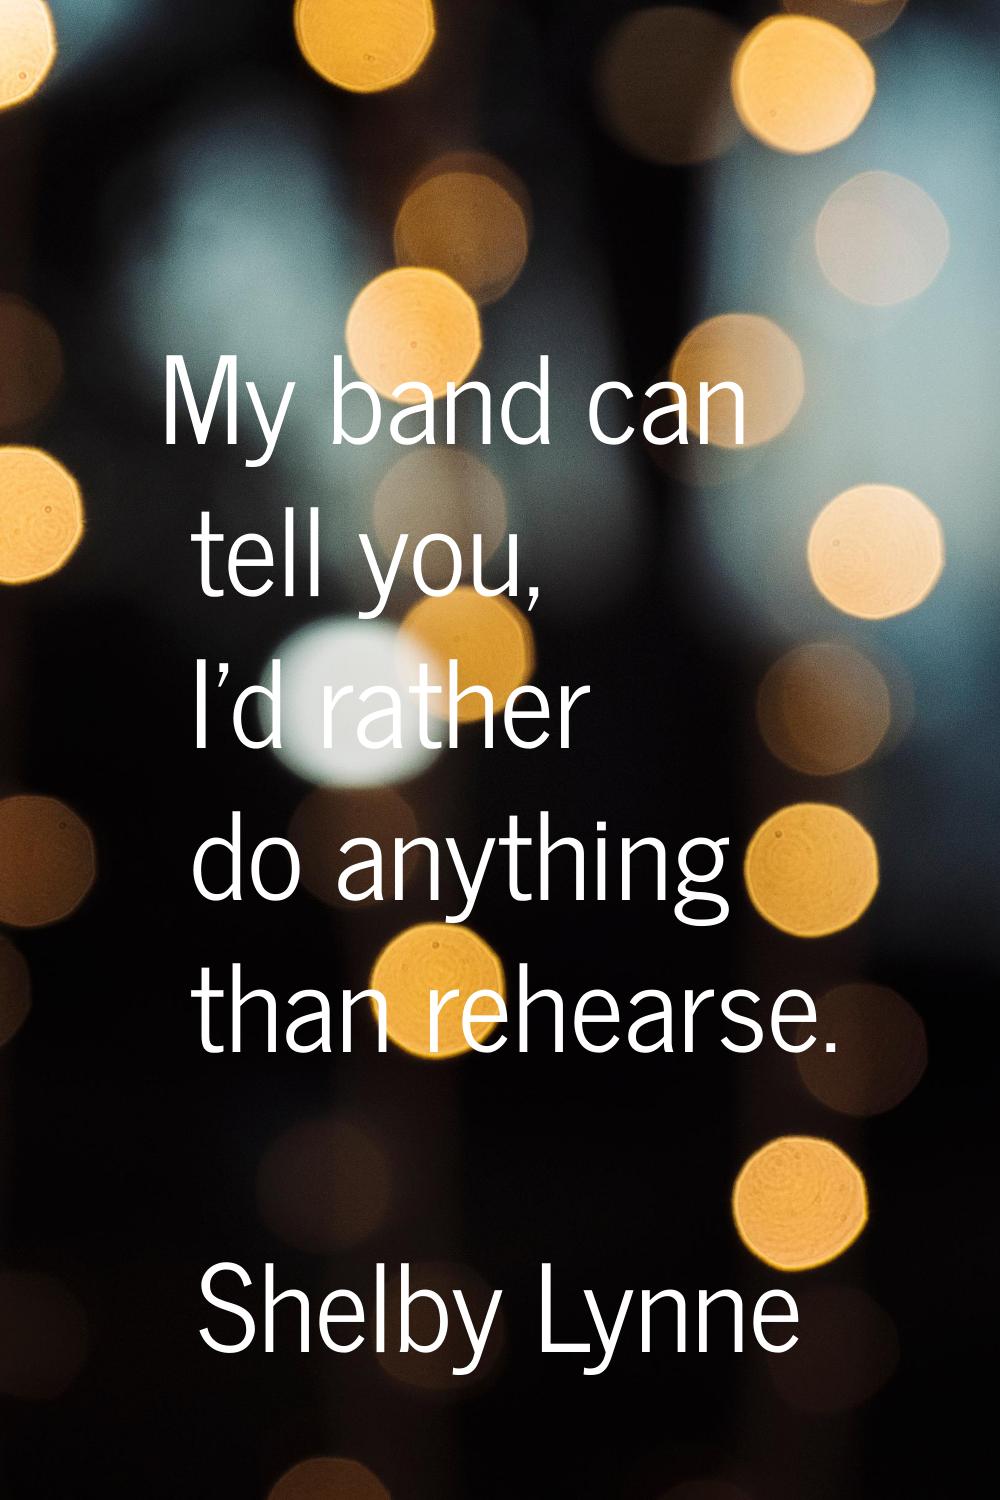 My band can tell you, I'd rather do anything than rehearse.